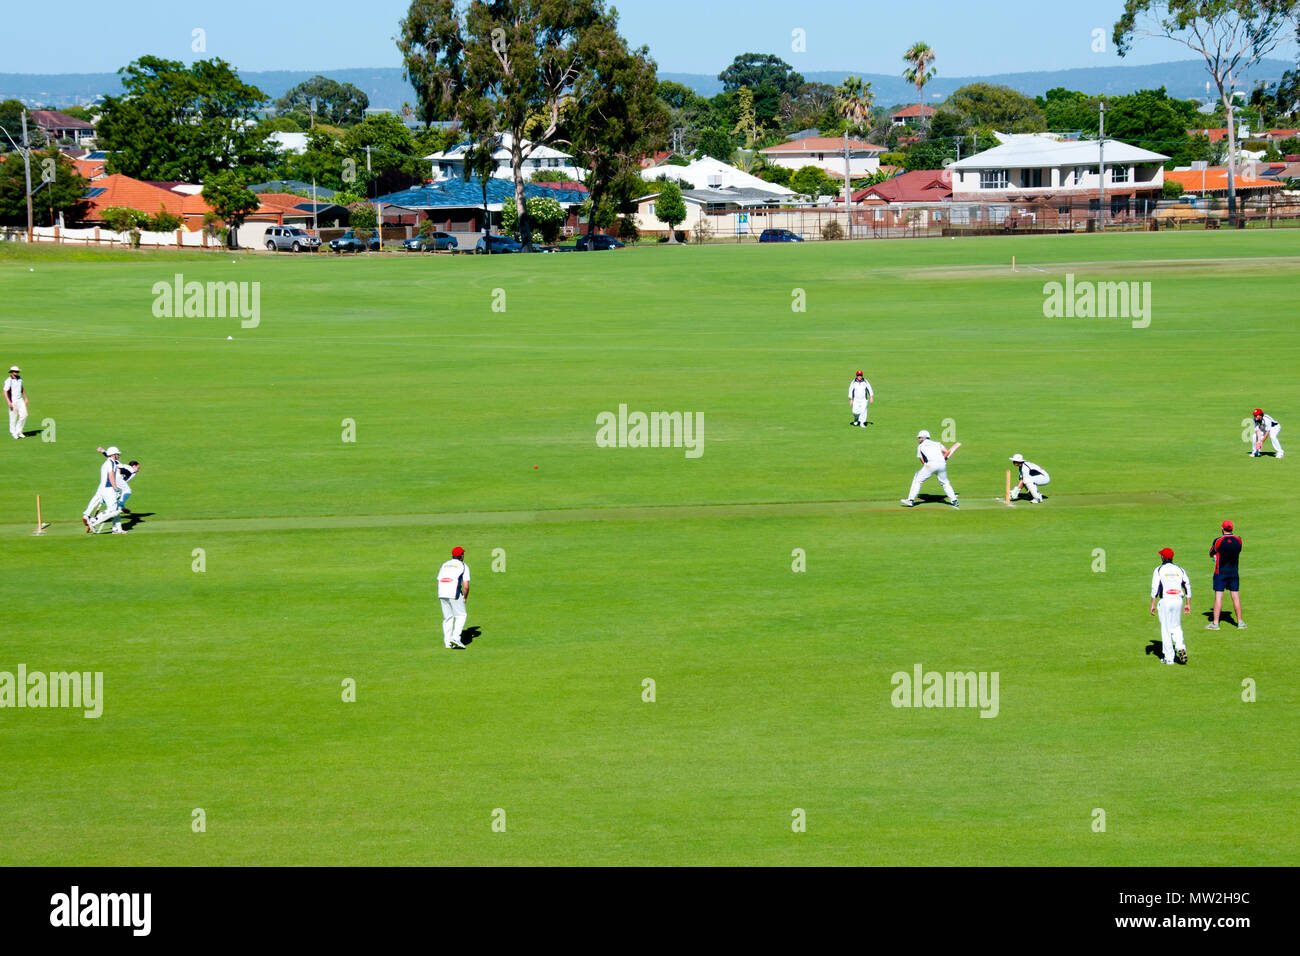 PERTH, AUSTRALIA - February 10, 2018: Outdoors recreational cricket game played in park Stock Photo